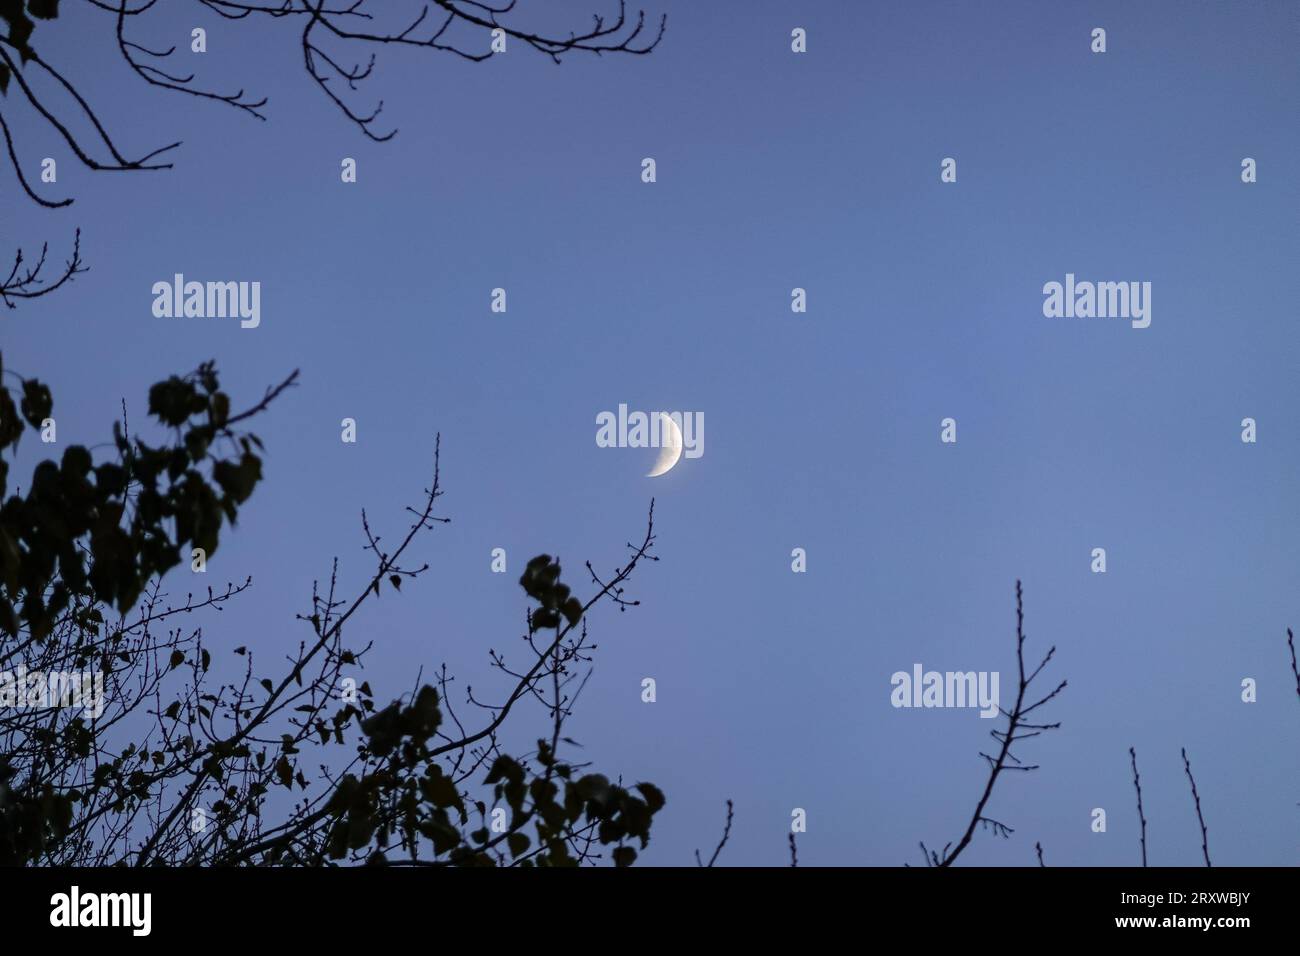 The moon shines through the branches of the trees, creating a mysterious and romantic mood. Stock Photo